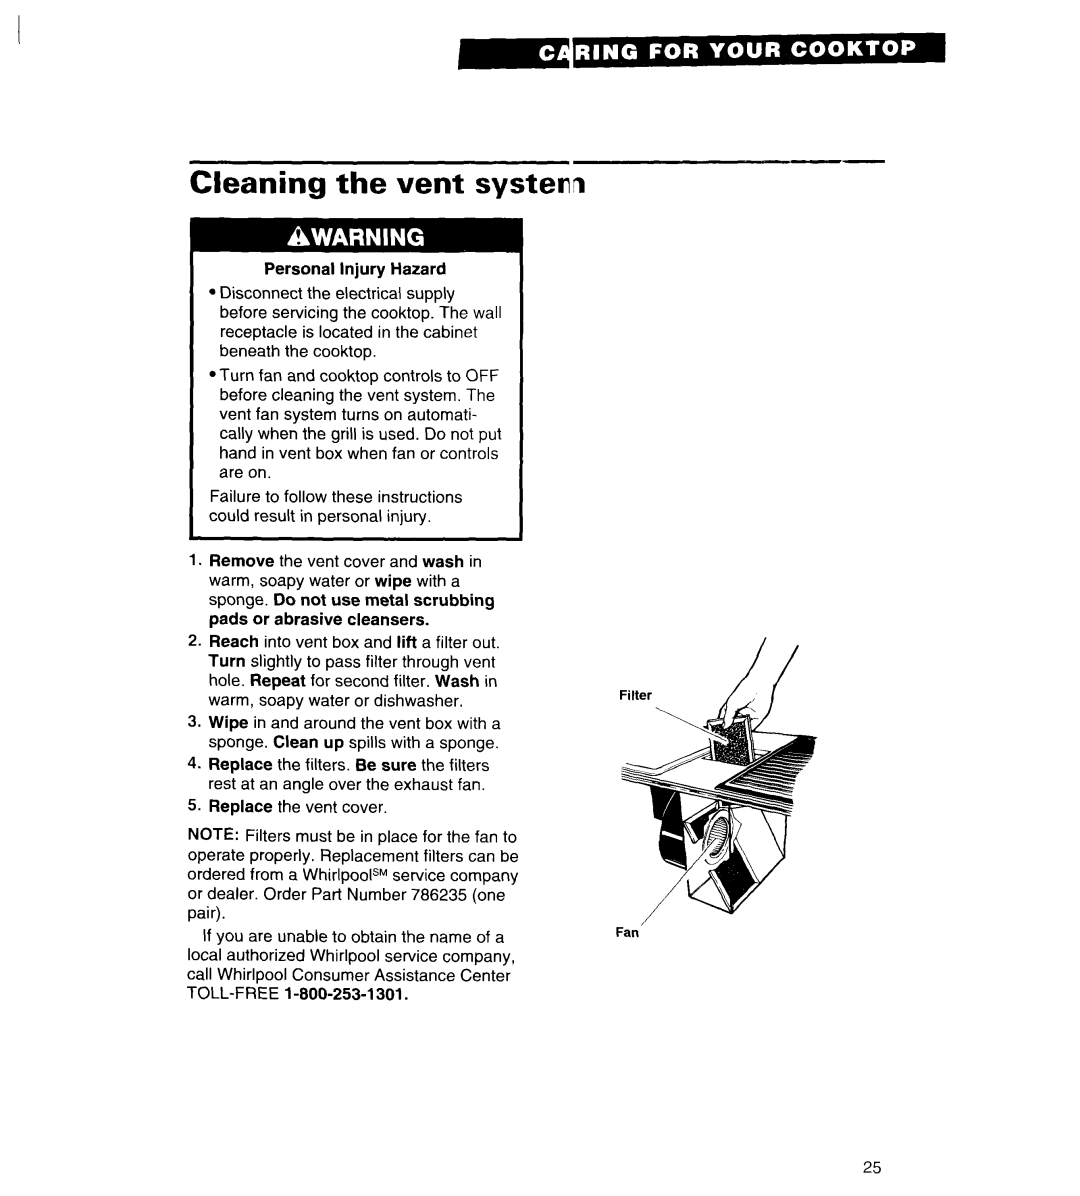 Whirlpool RC8920XA, RC8900XA important safety instructions Cleaning the vent system, Personal Injury Hazard 